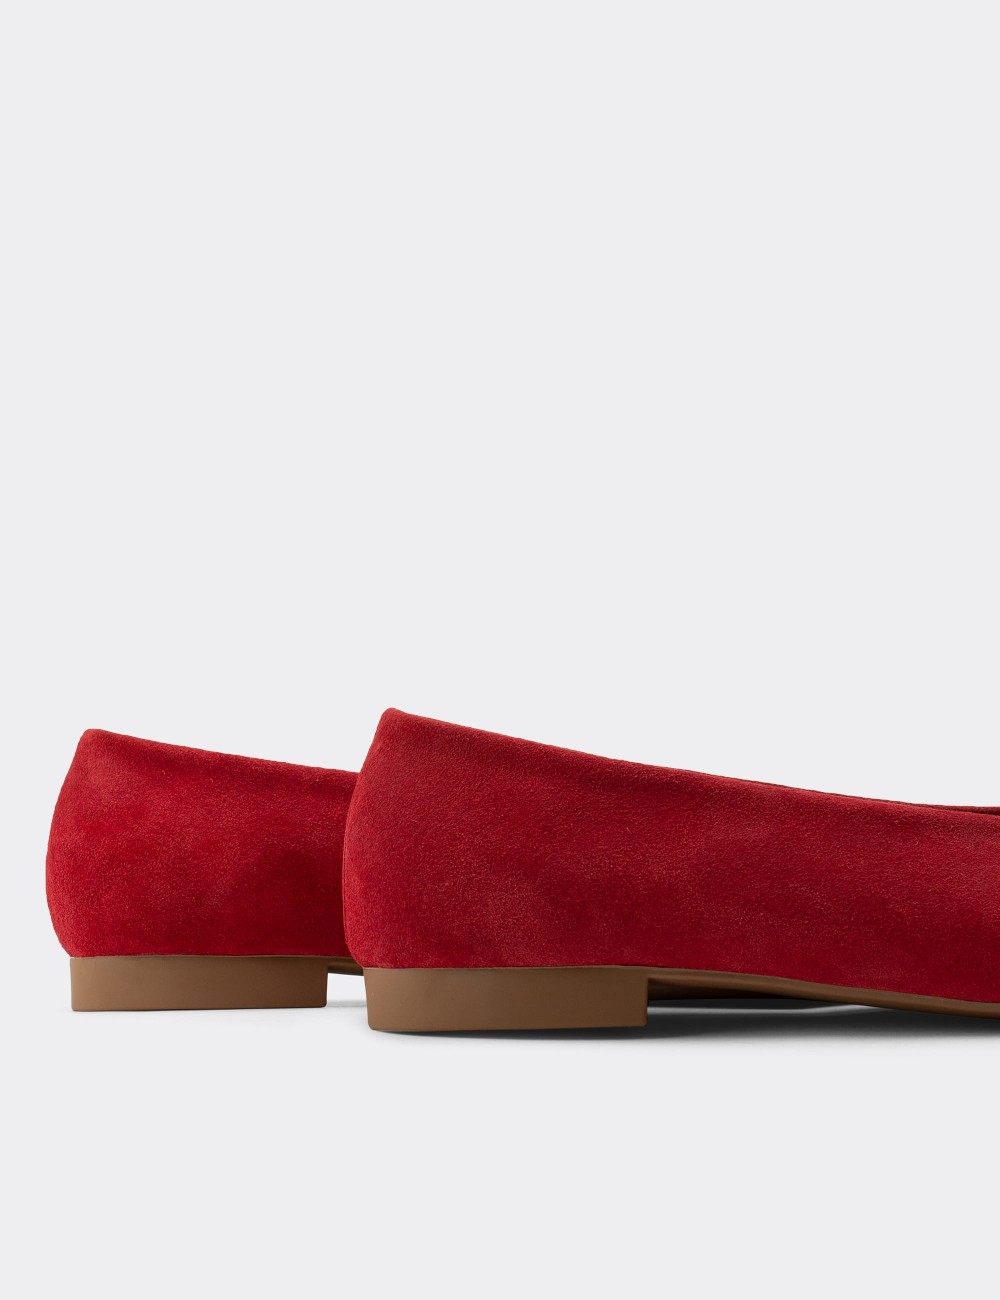 Red Suede Leather Loafers - 01896ZKRMC01